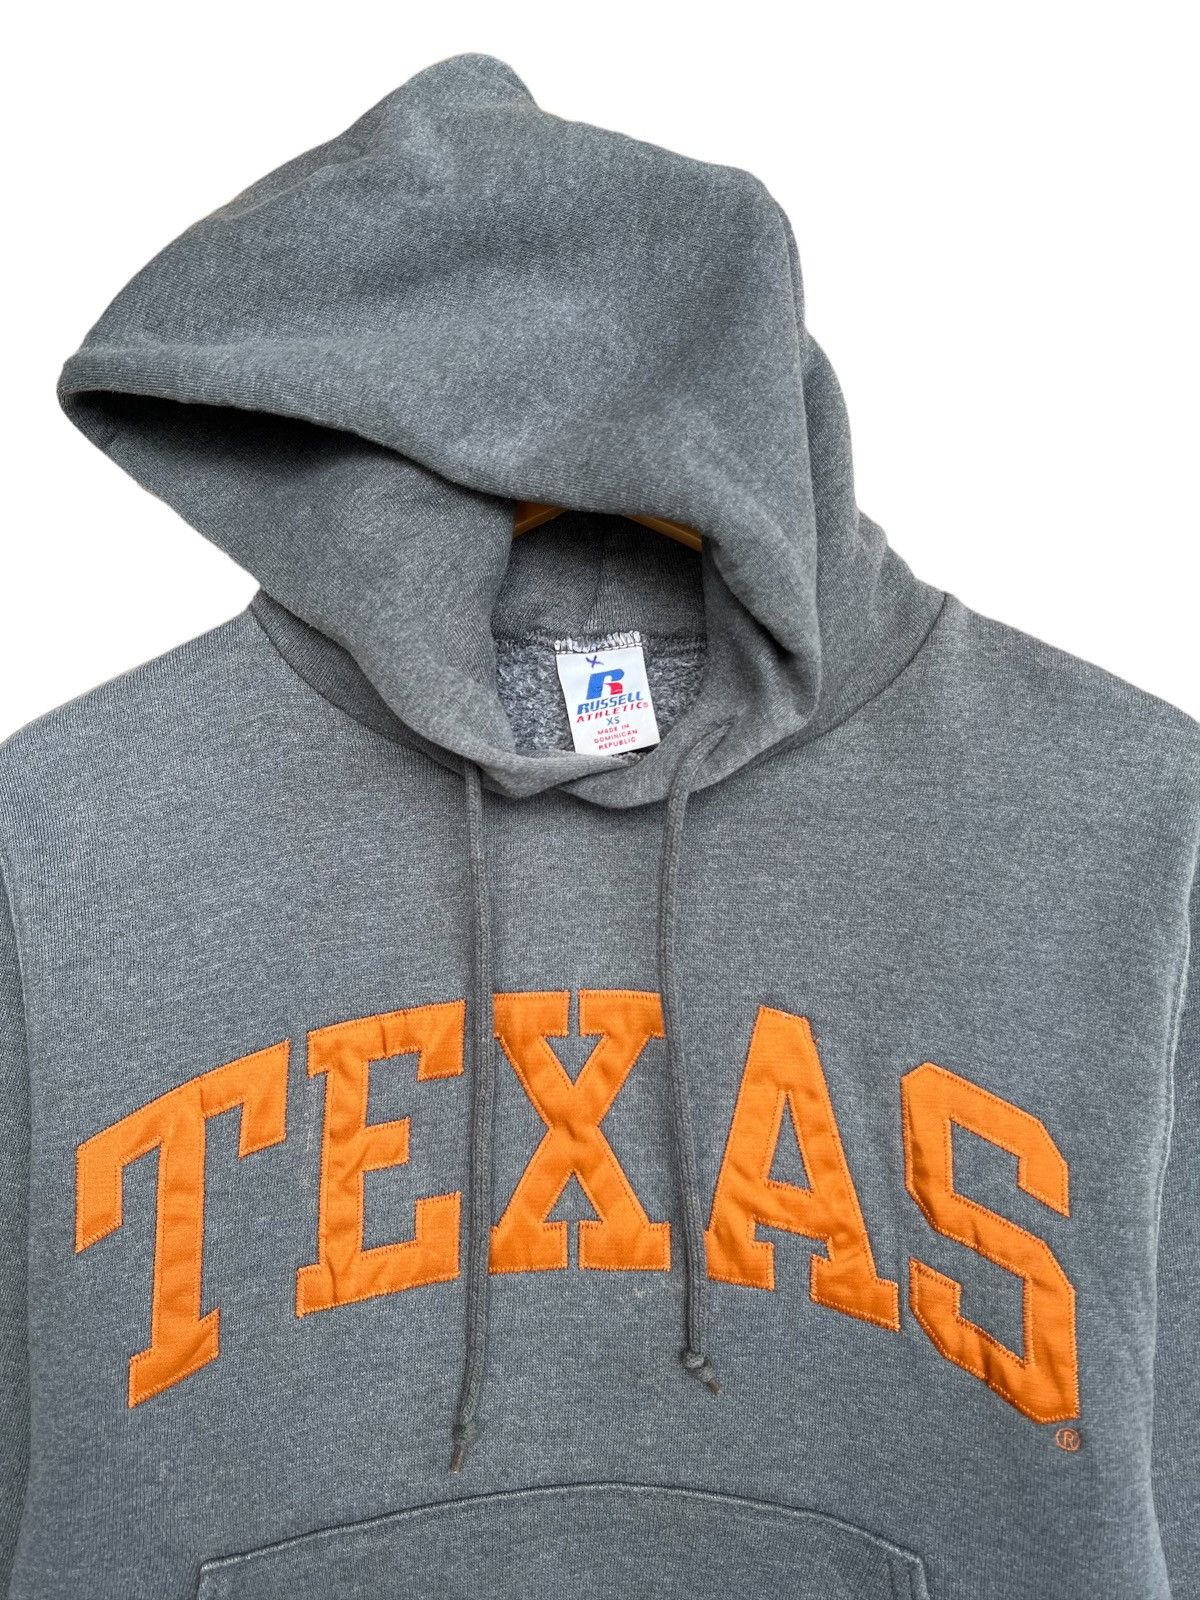 Vintage Russell Texas Spellout Hoodie University State - 4